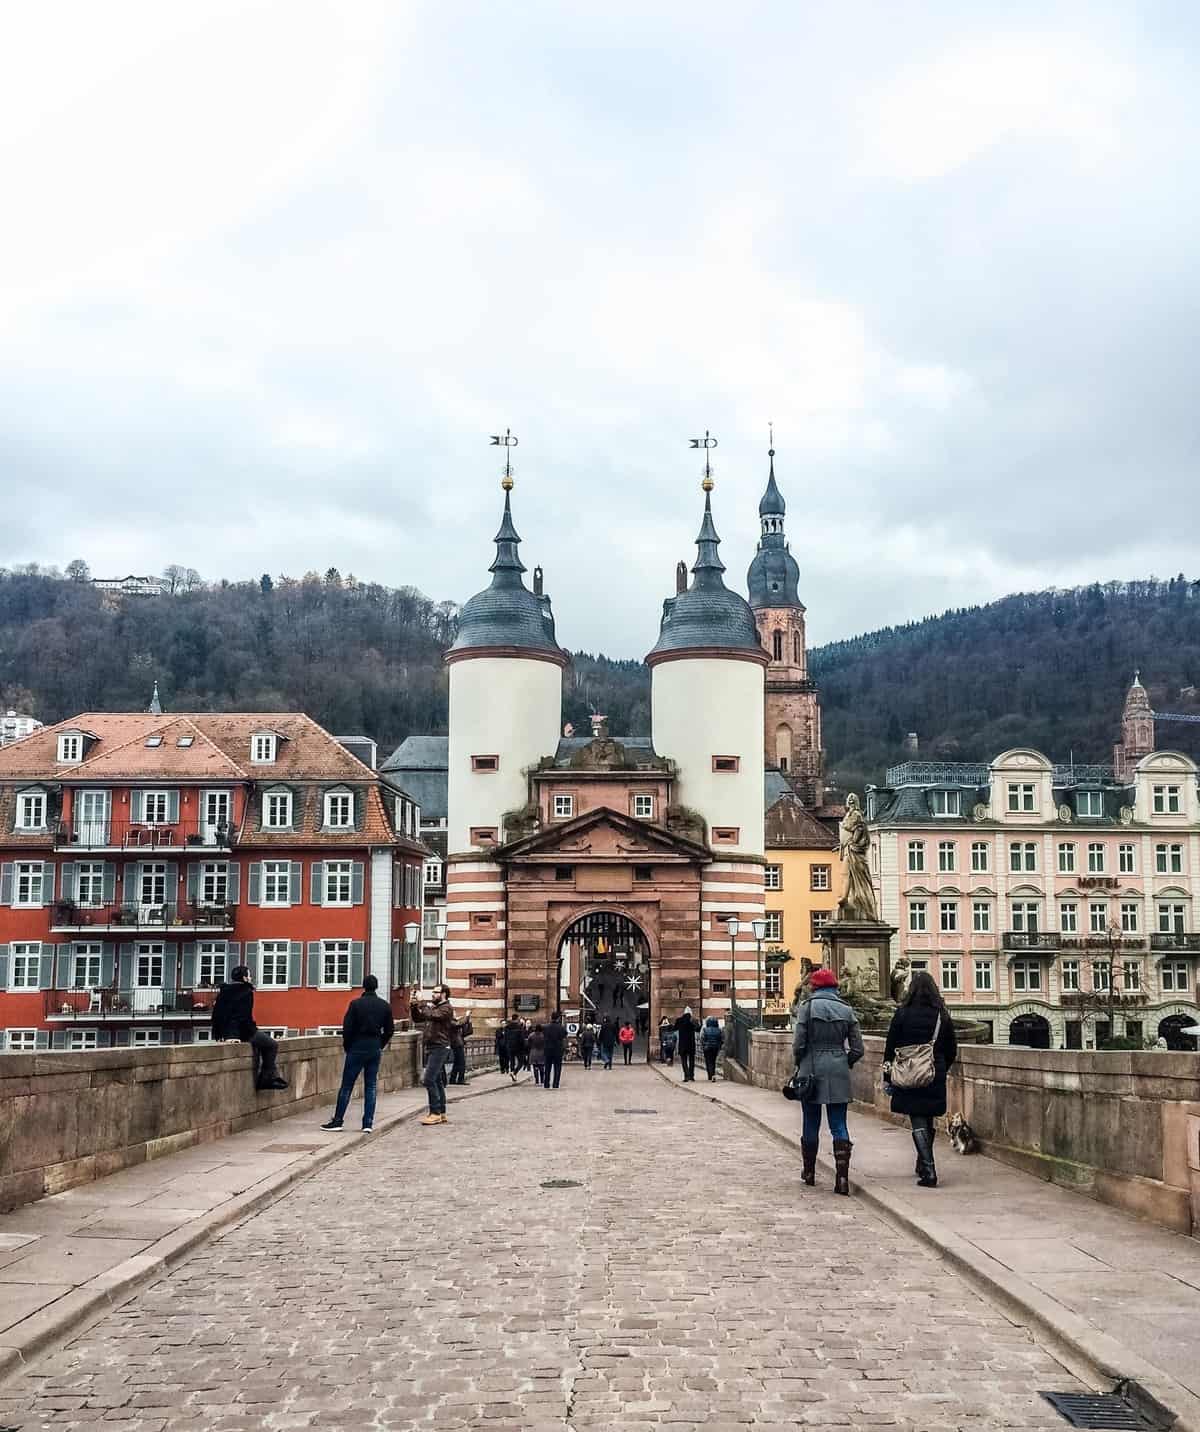 Heidelberg, Germany. One of the most popular destinations for a day trip from Frankfurt